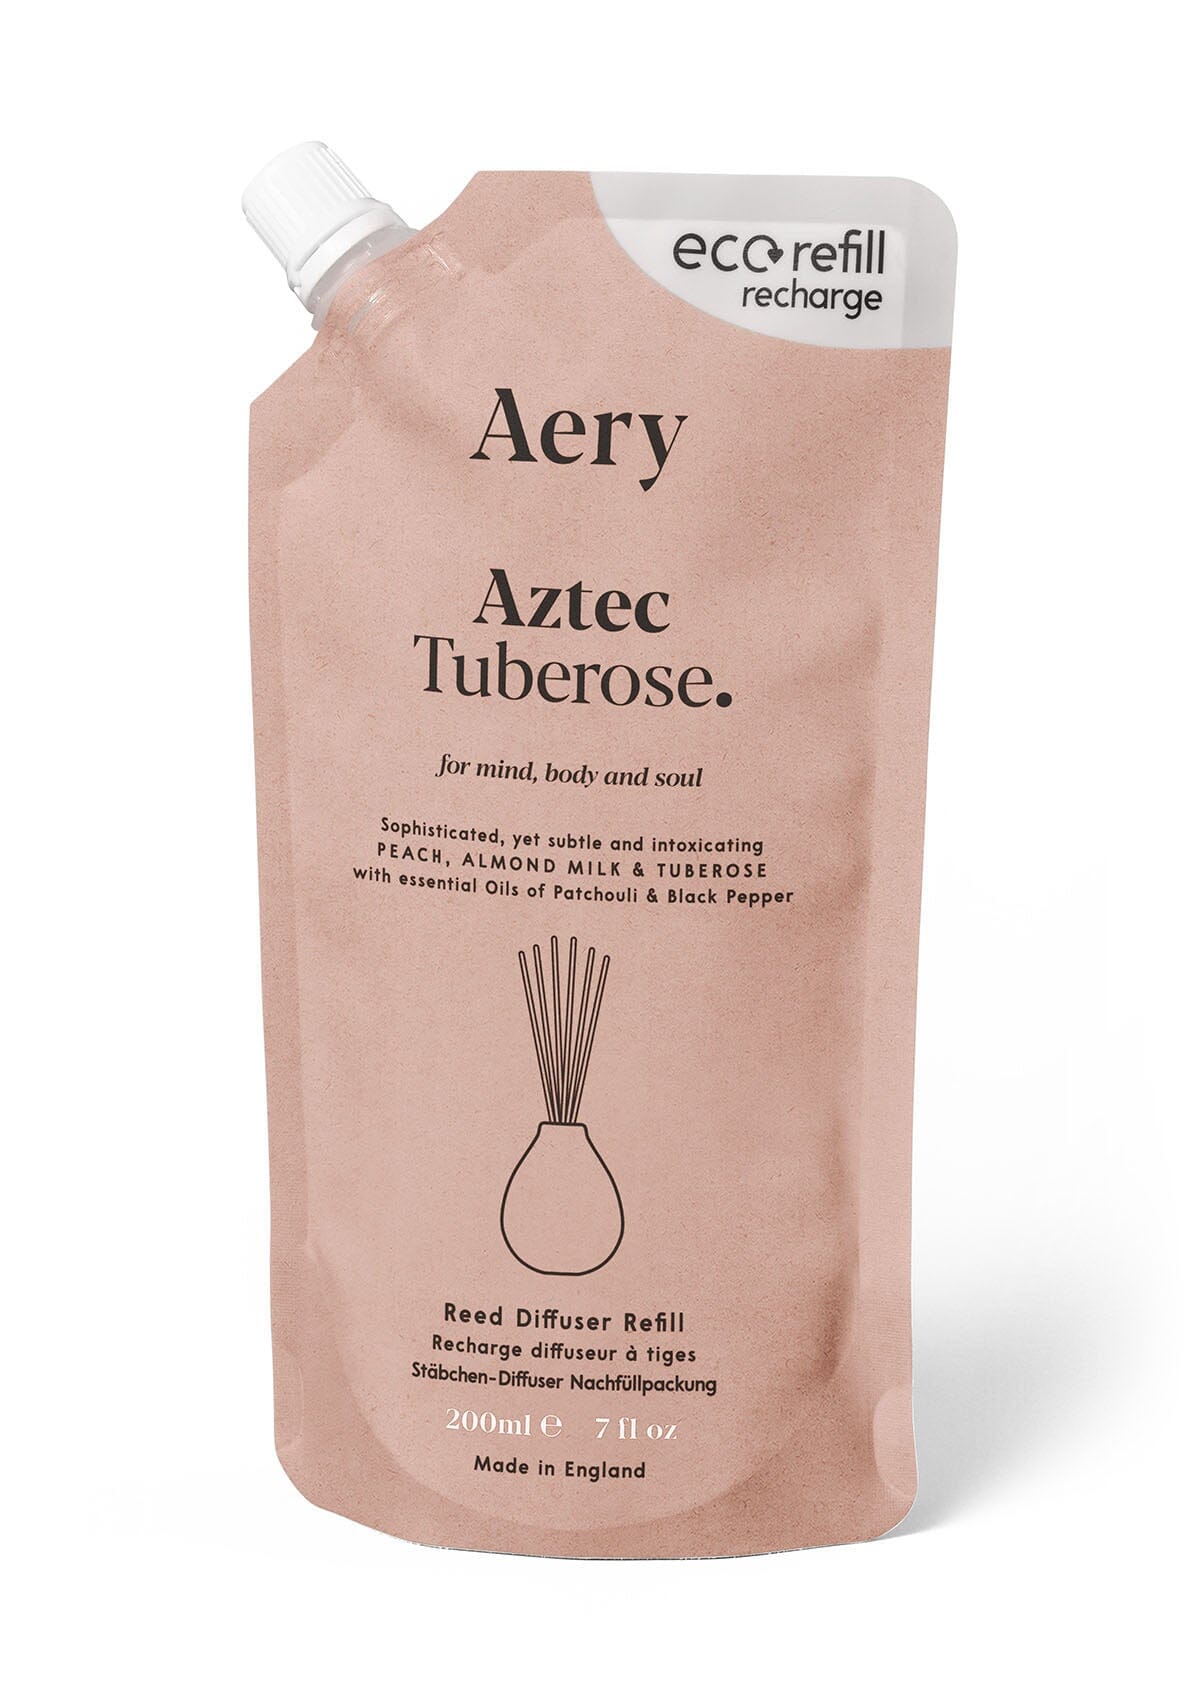 Aztec Tuberose reed diffuser pouch by aery displayed on white background 